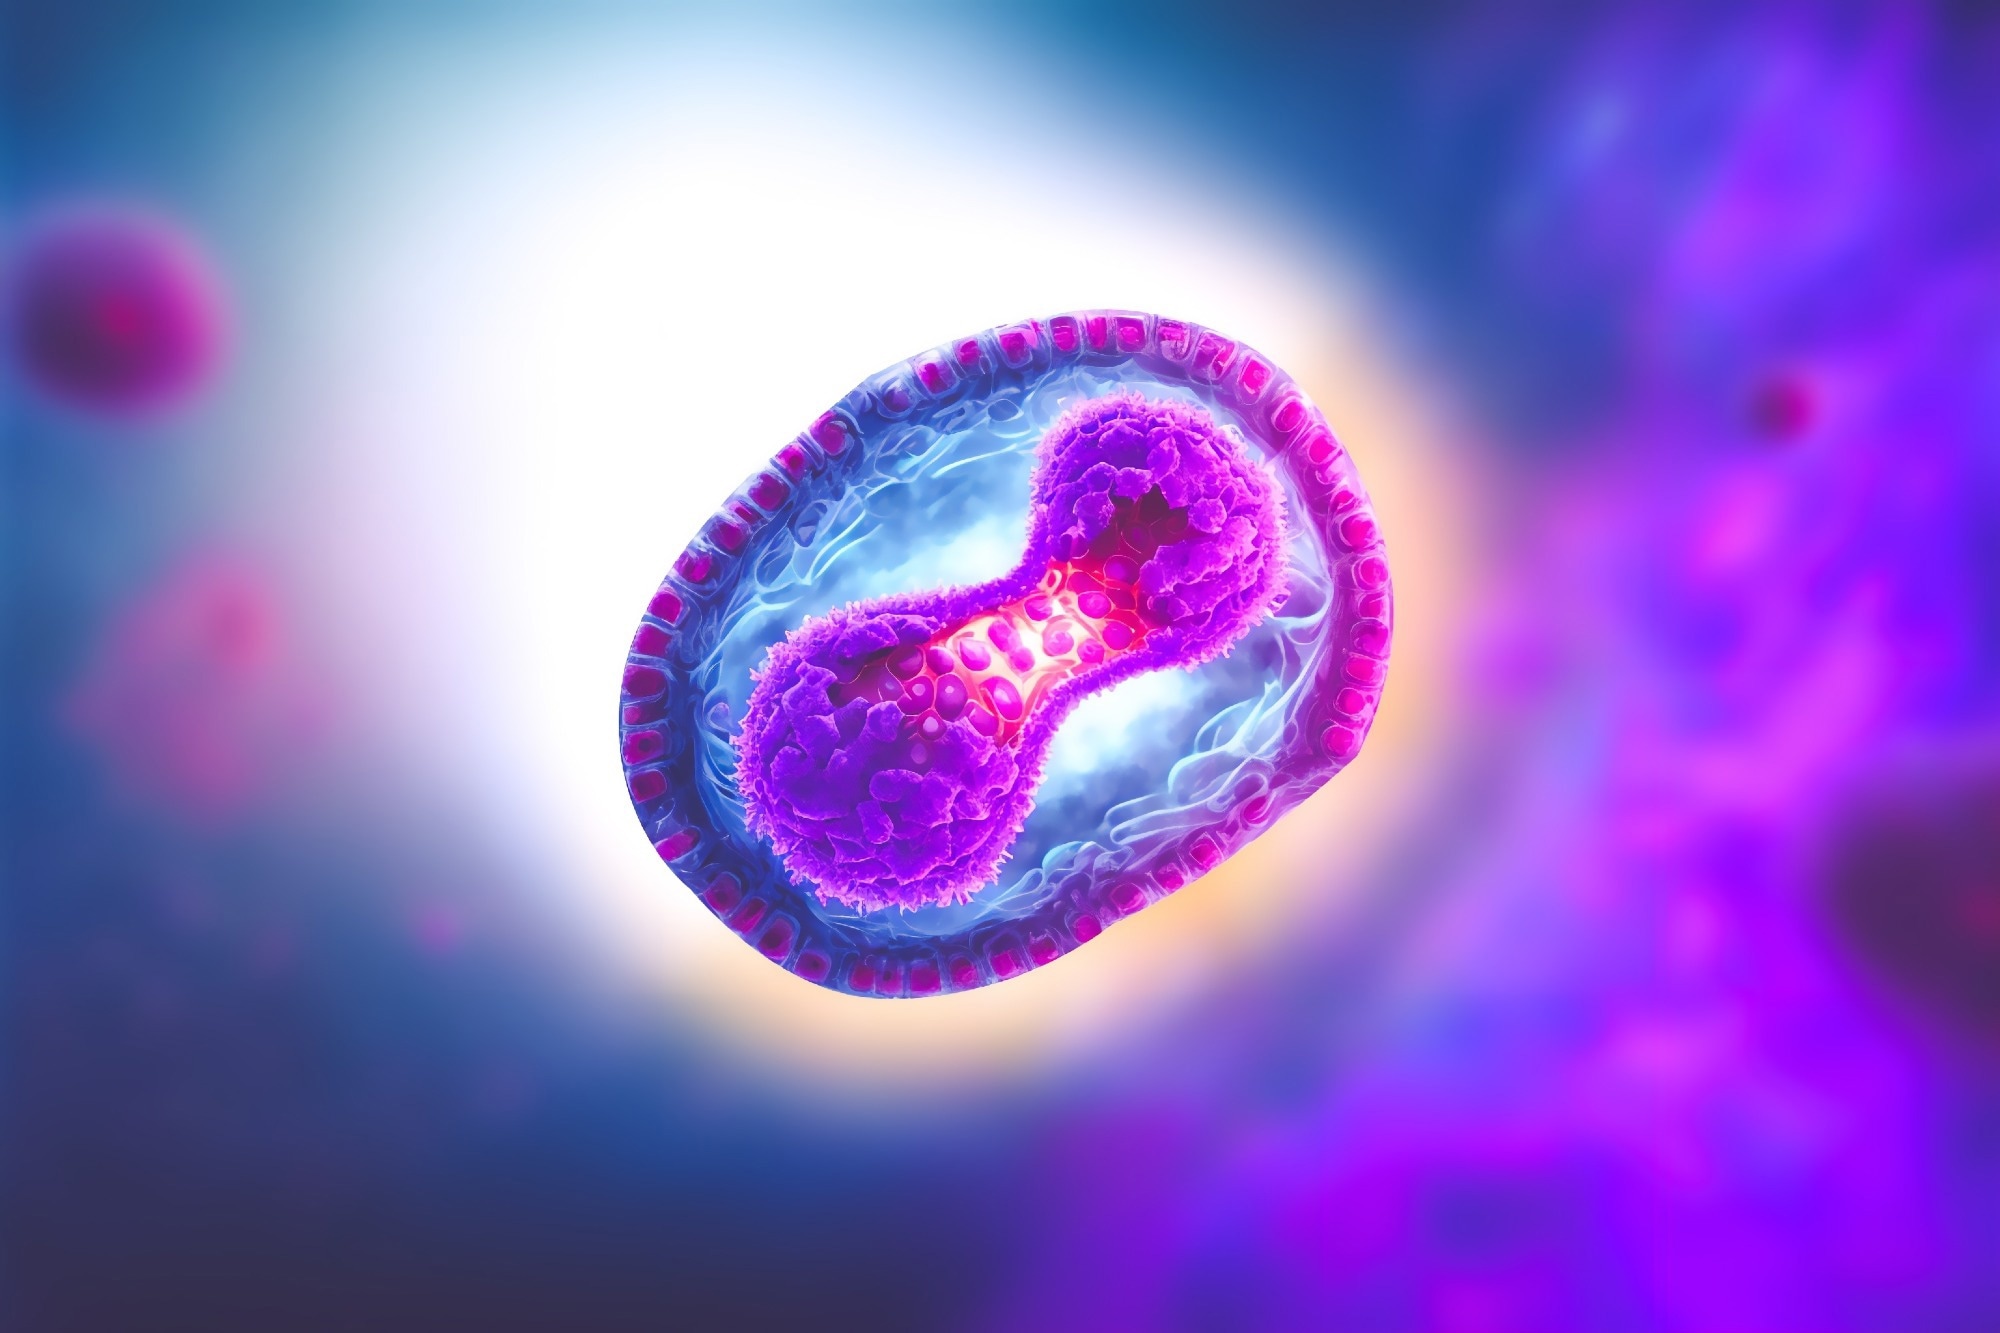 Study: Mpox virus detection in the wastewater and the number of hospitalized patients in Poznan metropolitan area, Poland. Image Credit: CI Photos / Shutterstock